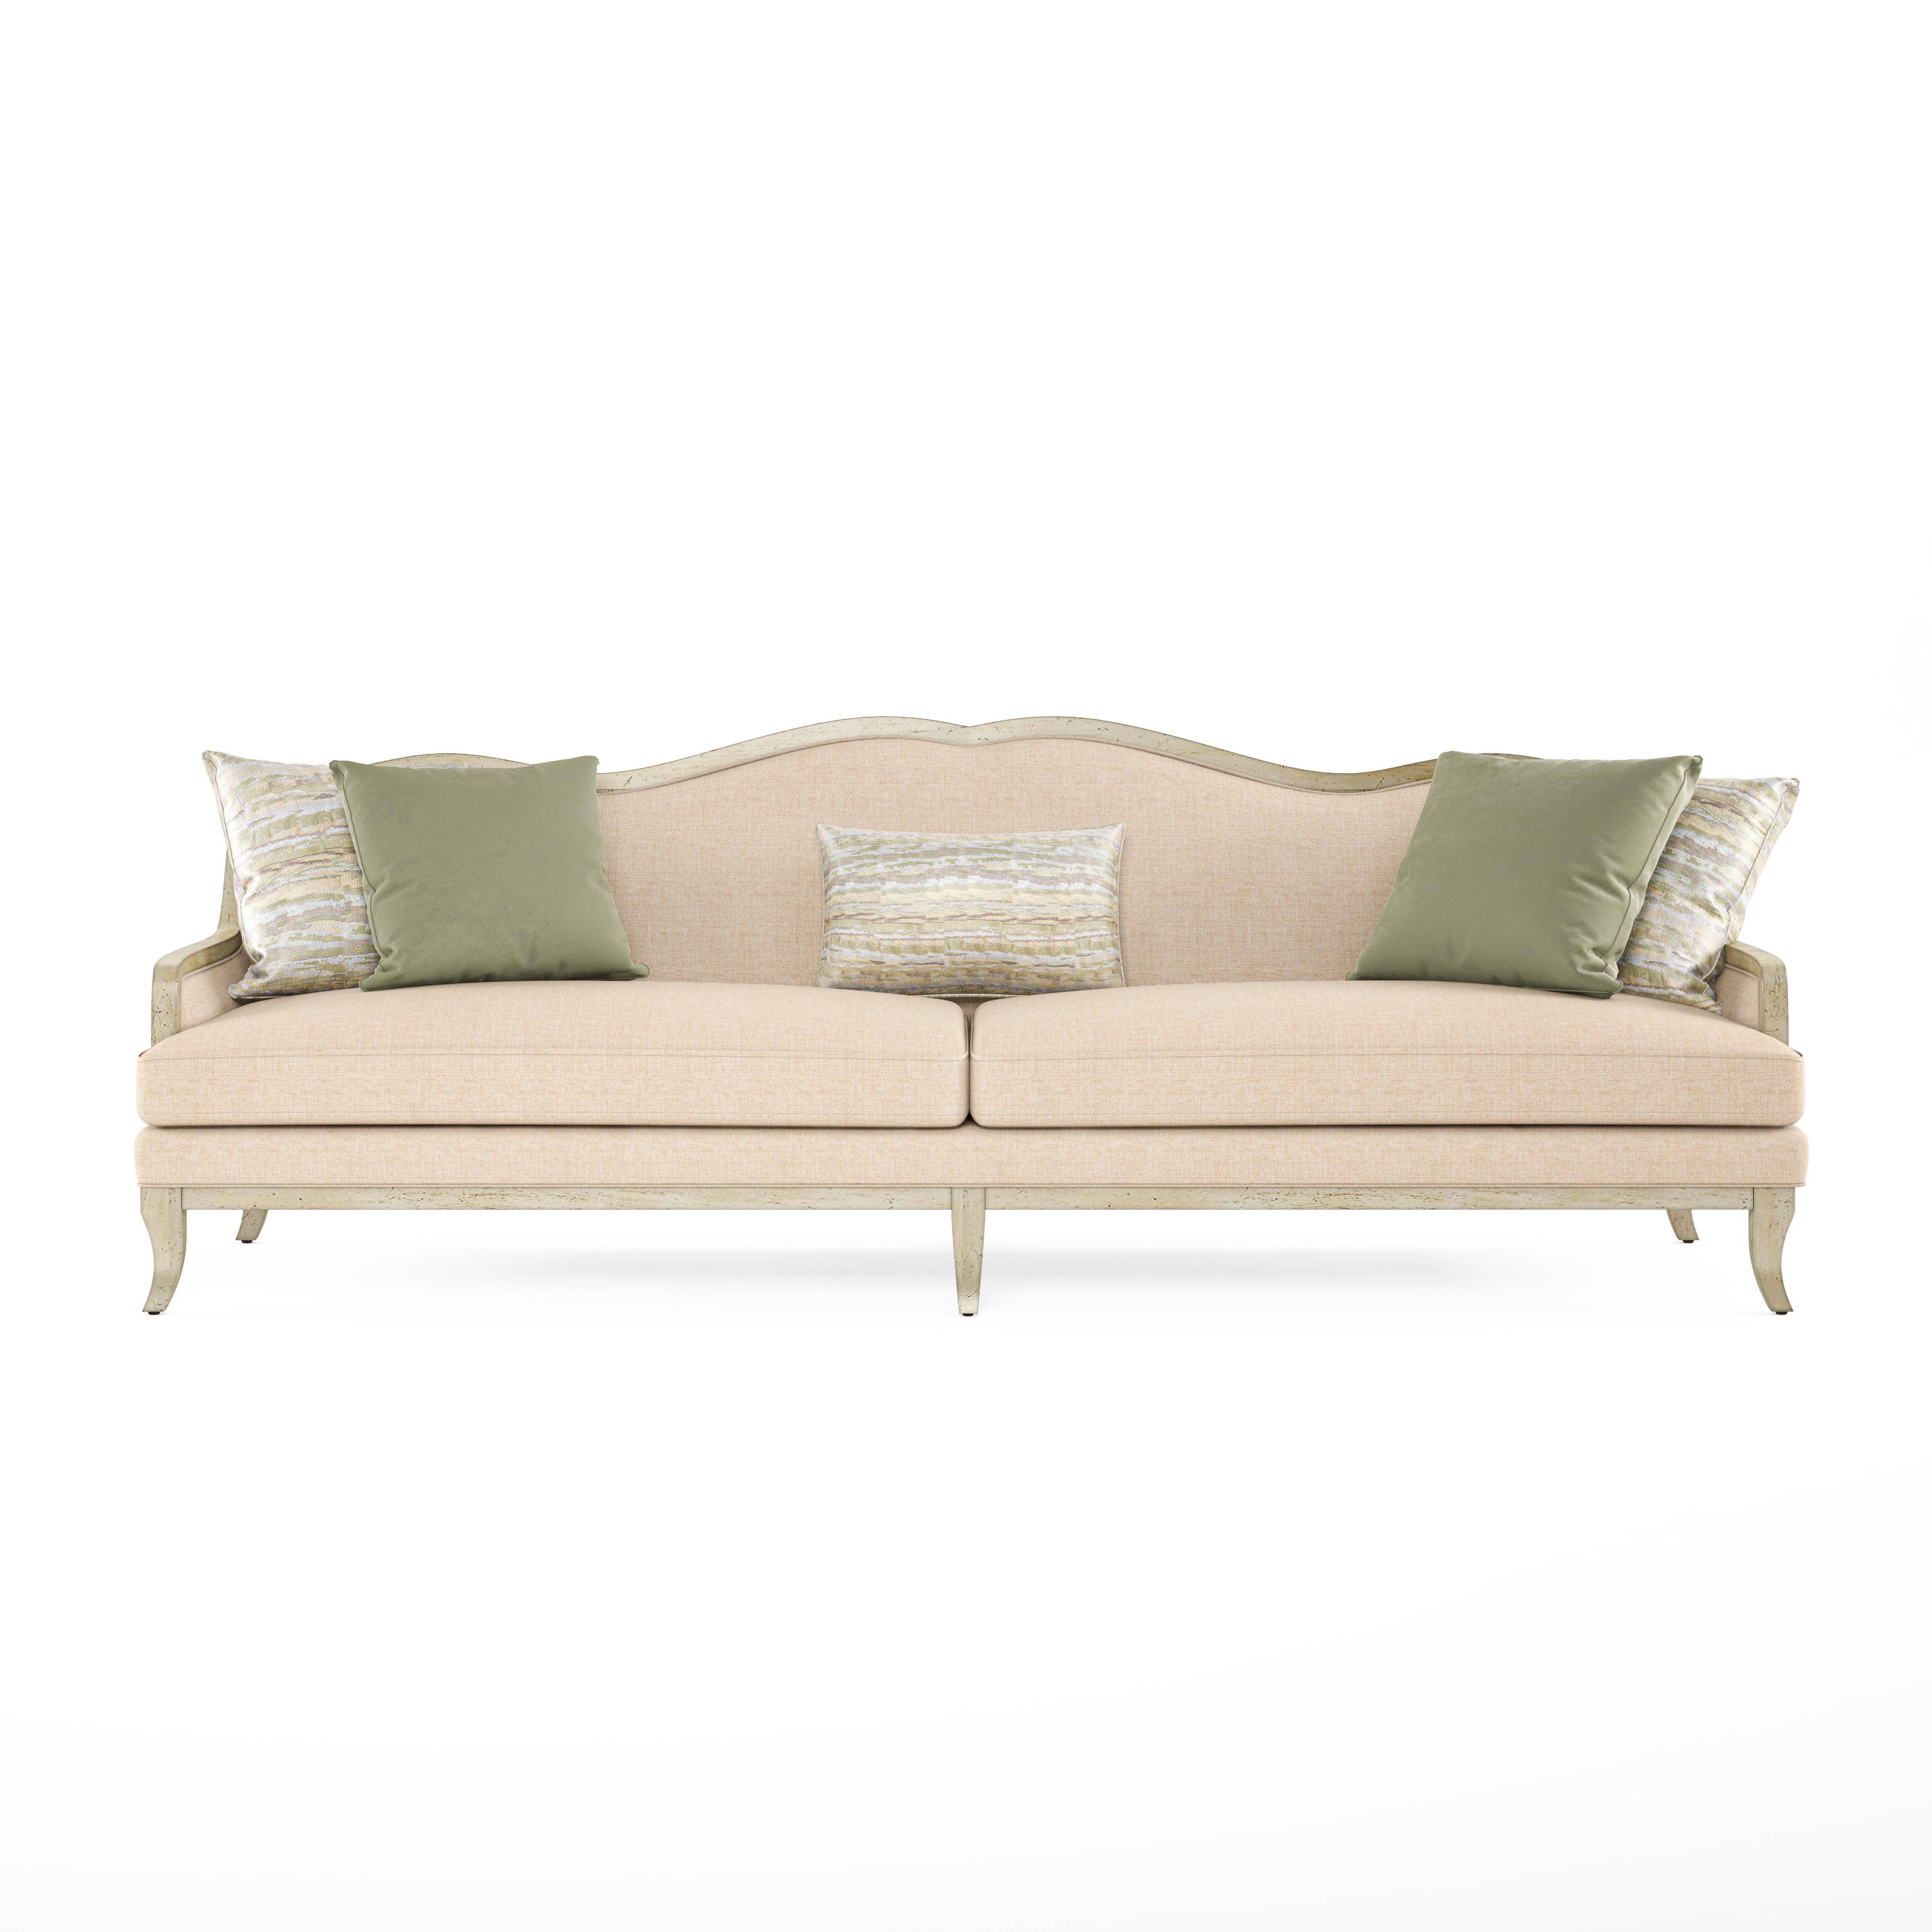 Classic, Traditional Sofa Assemblage 754521-5227AA in Emerald Fabric